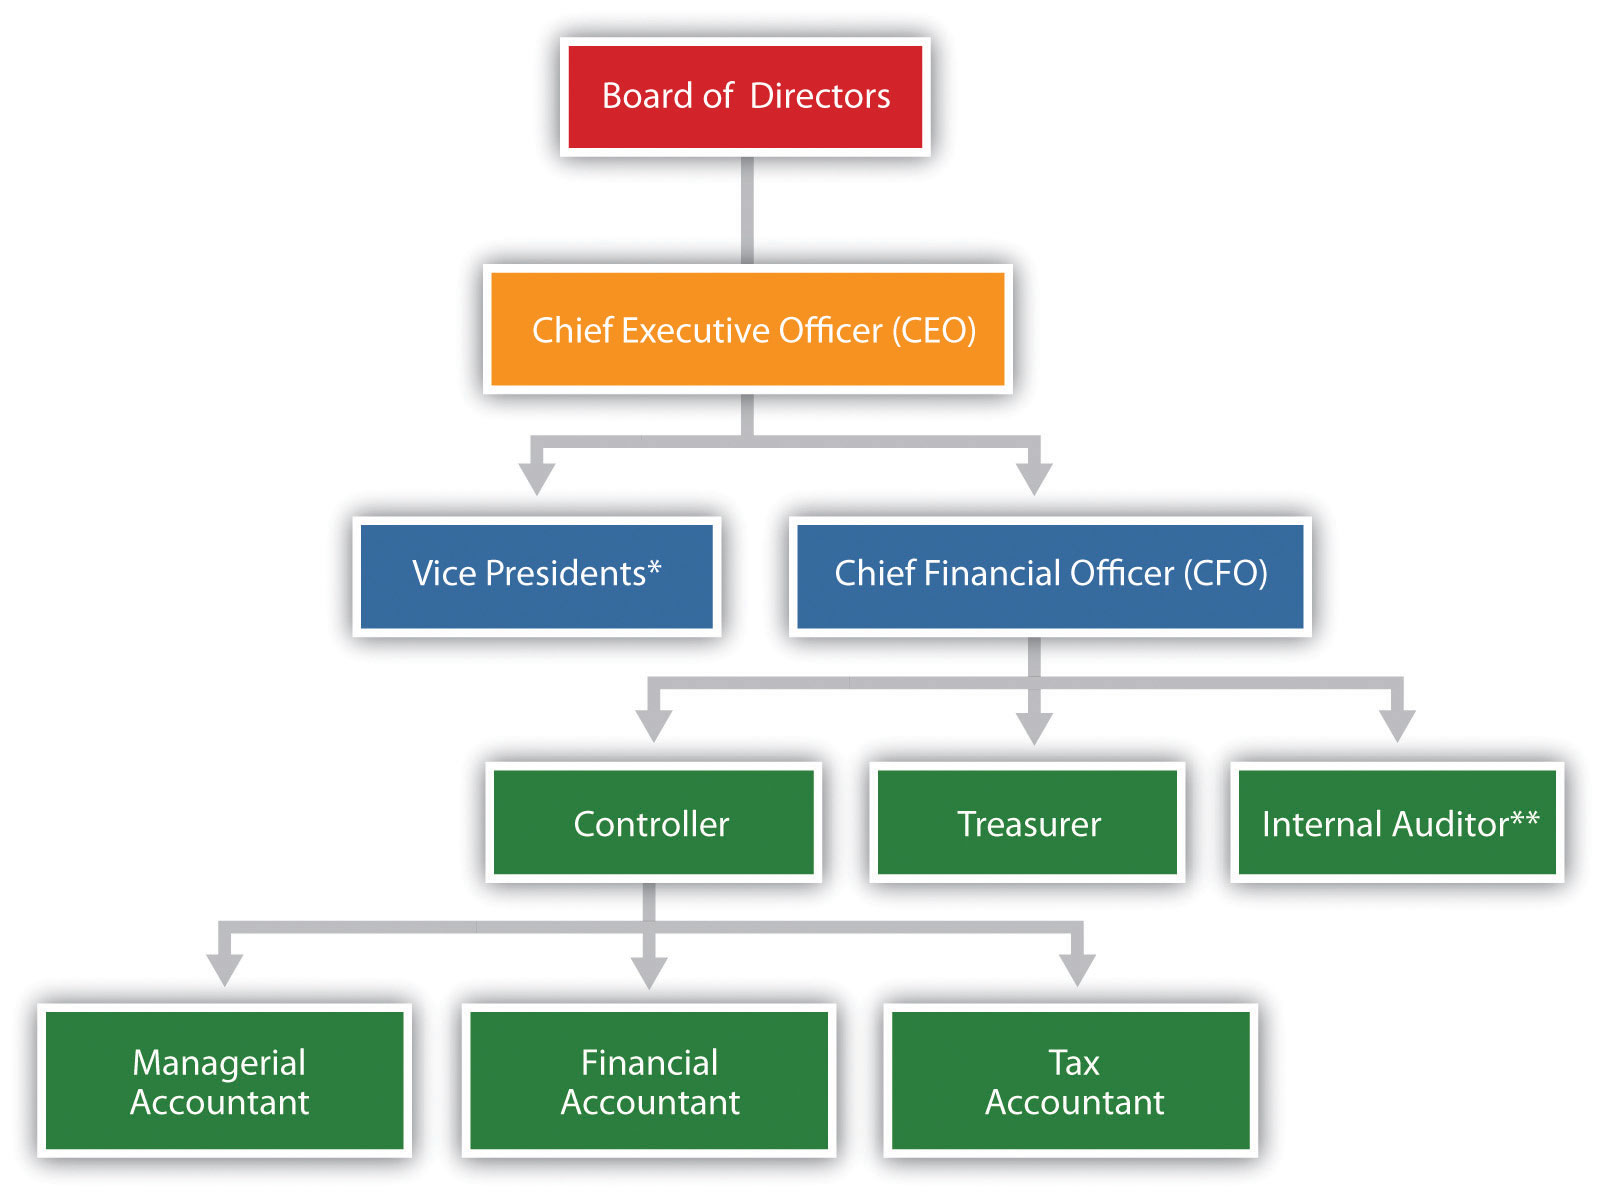 Potential organizational structure of a finance department in a public company 